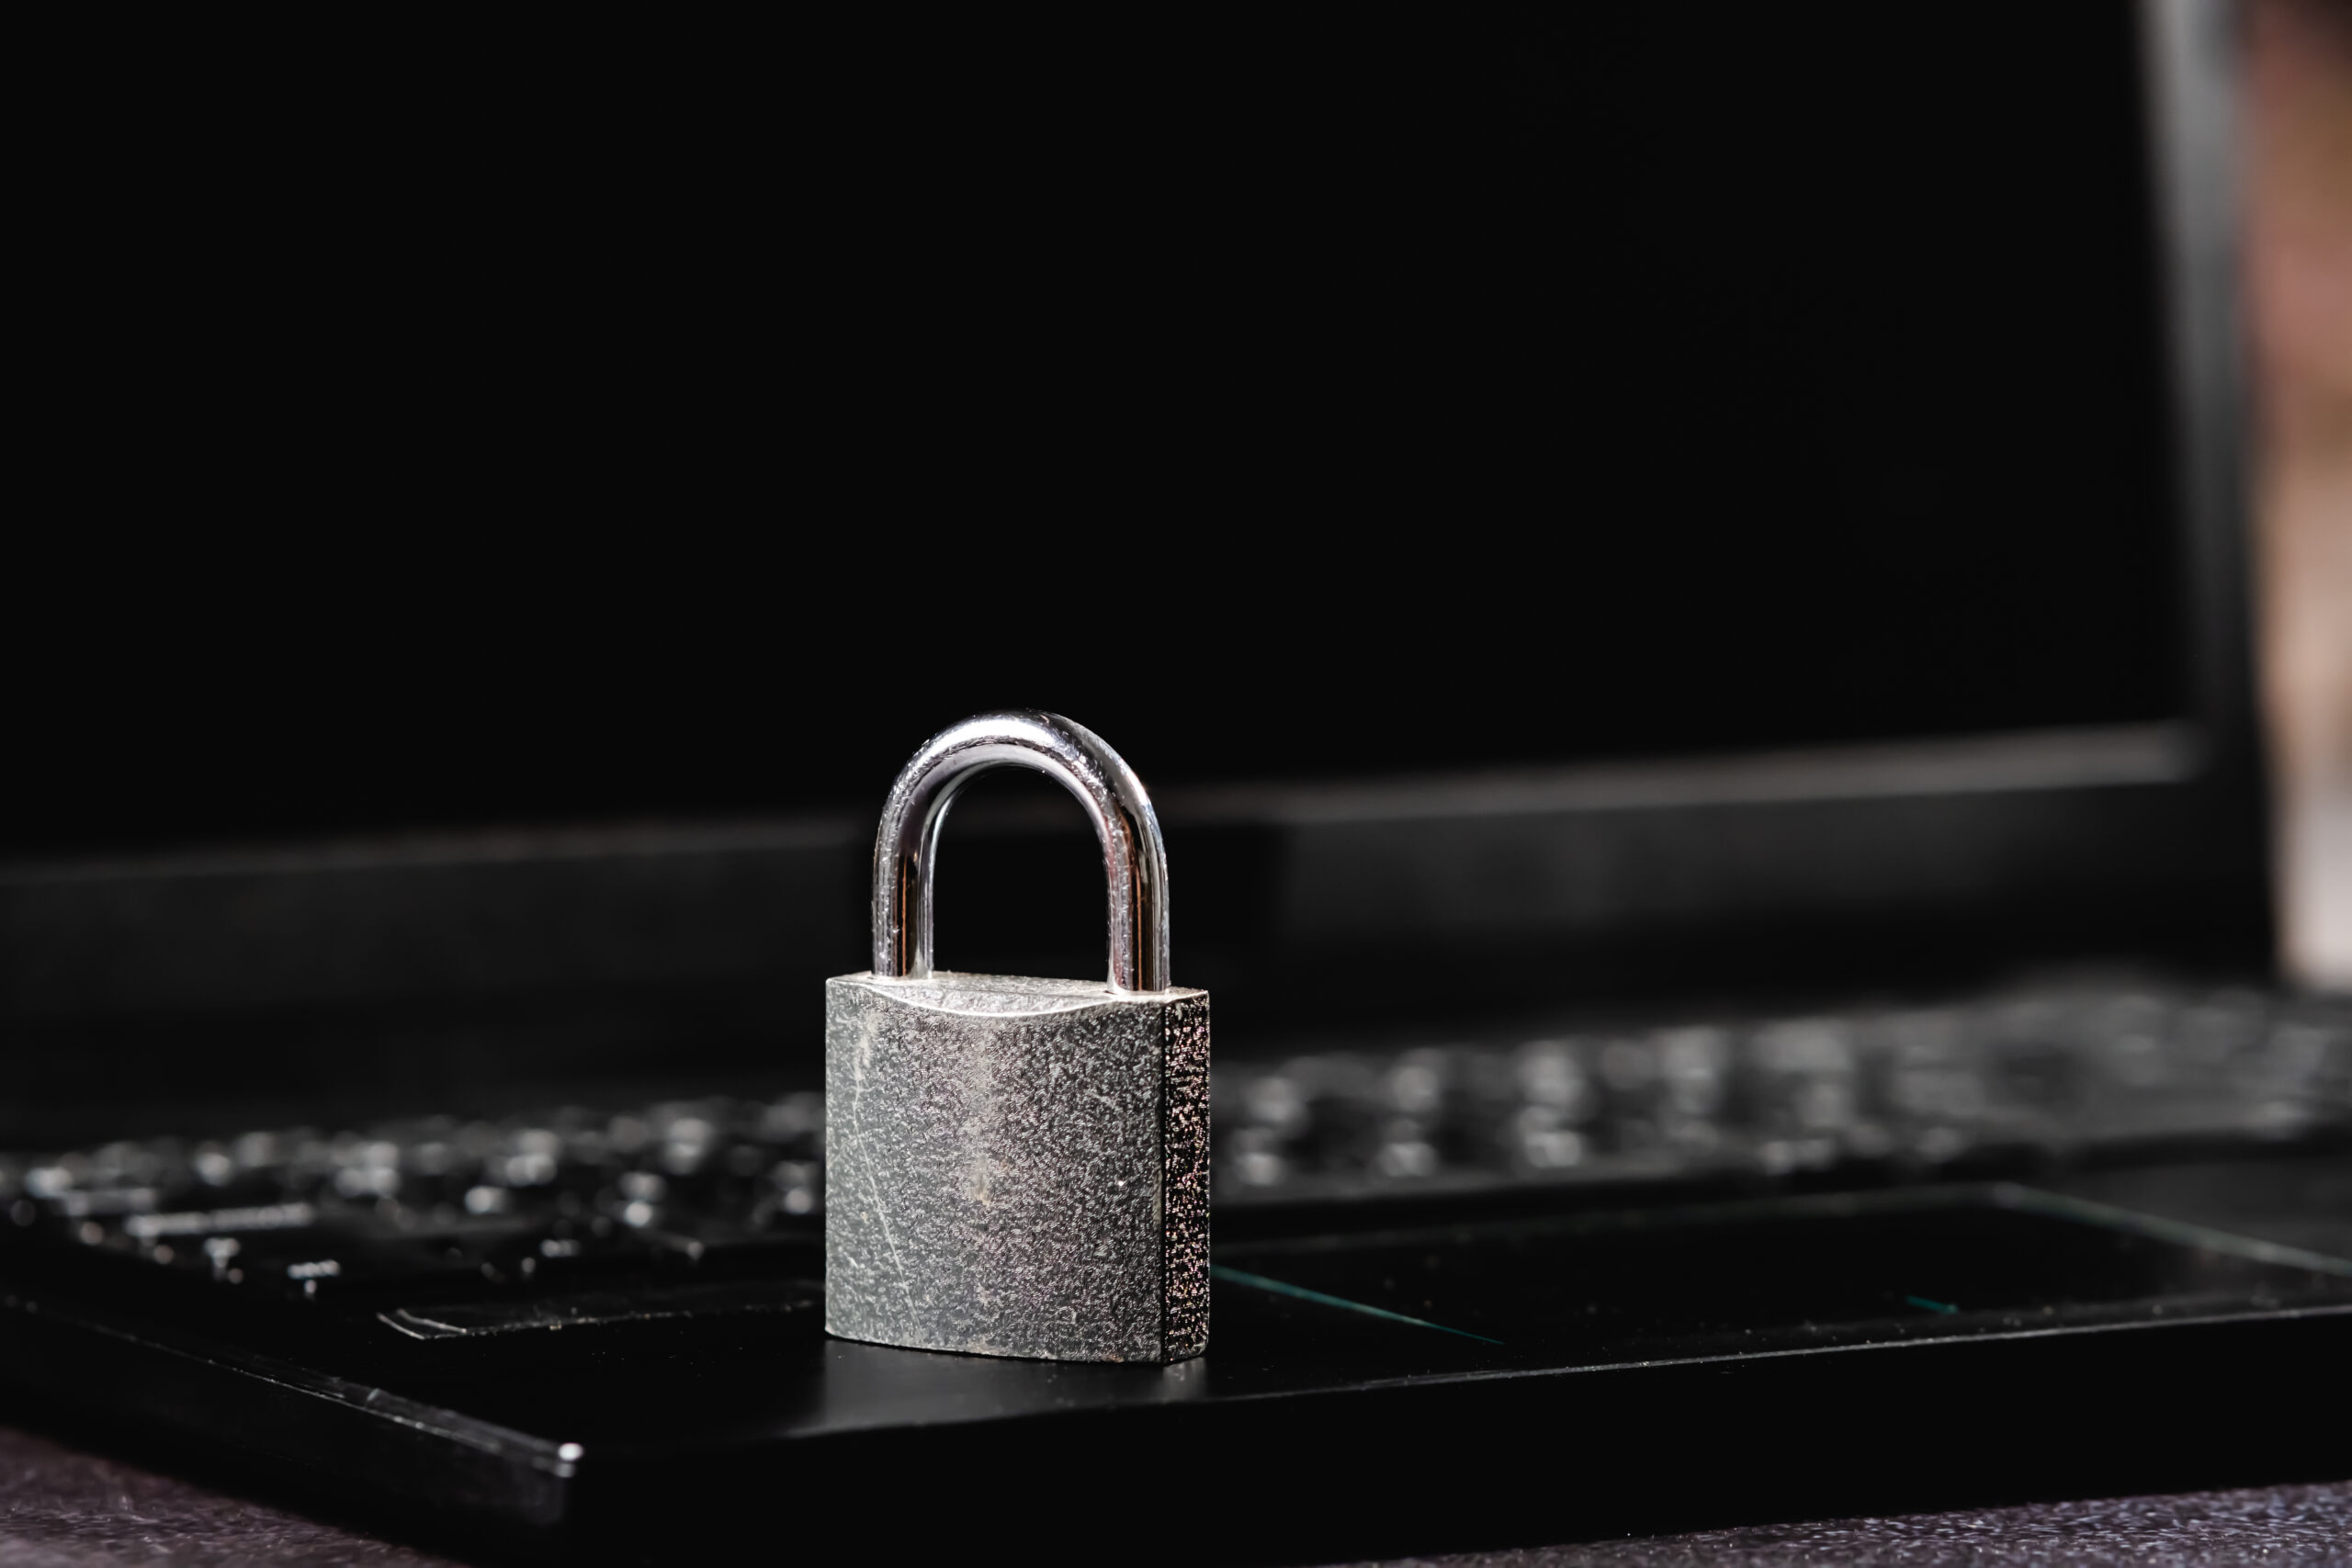 Celero’s Guide to Small Business Data Security and Compliance